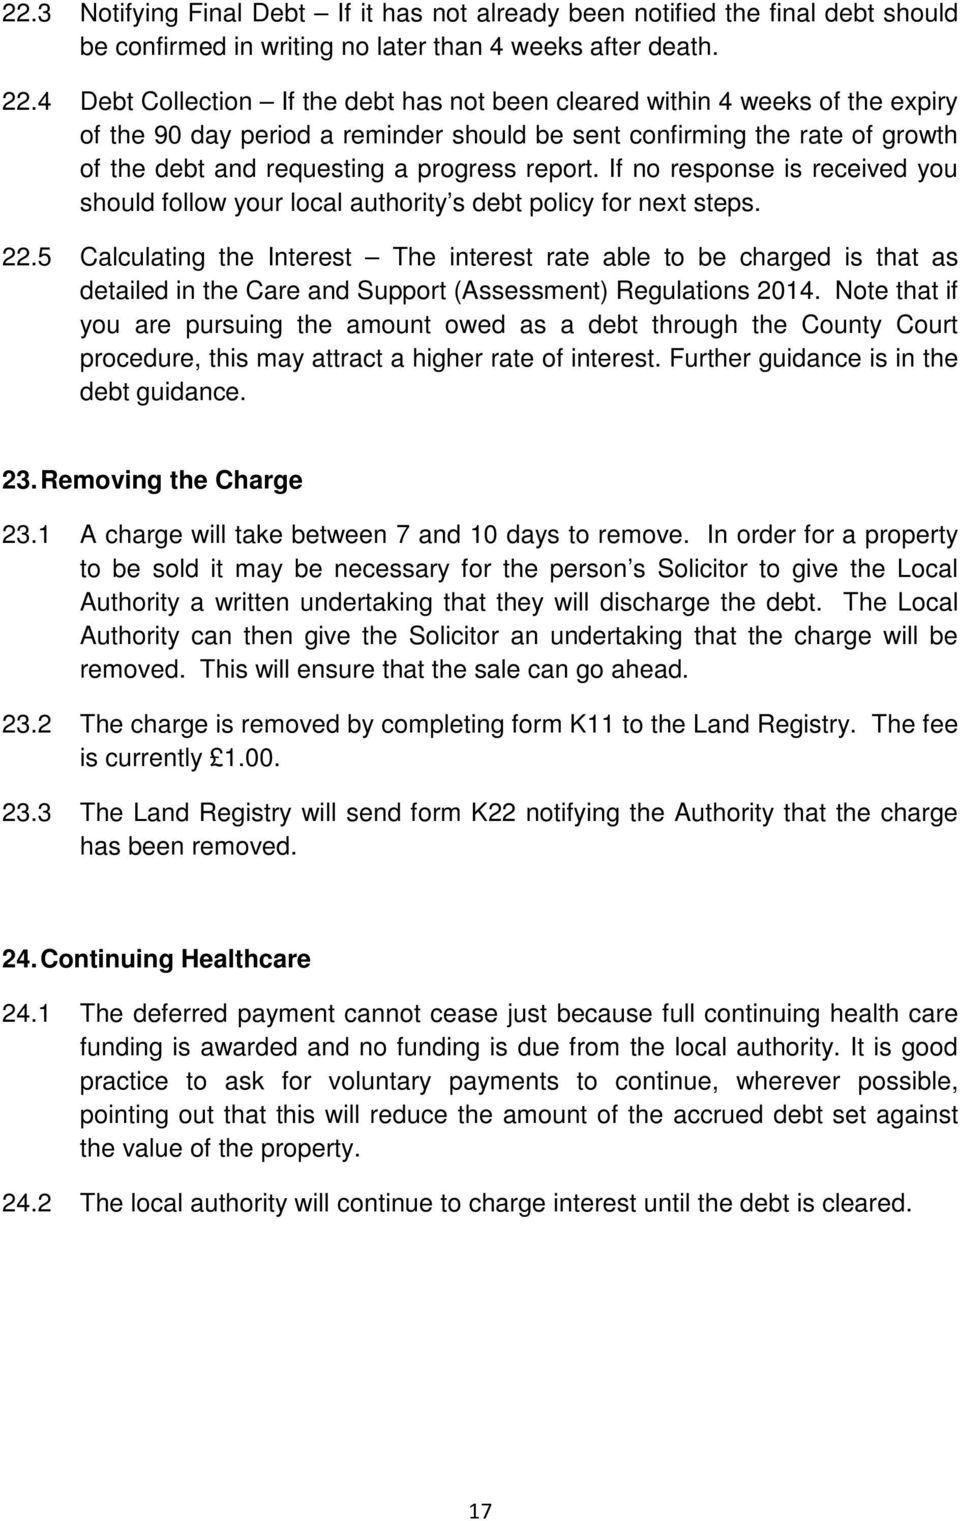 report. If no response is received you should follow your local authority s debt policy for next steps. 22.